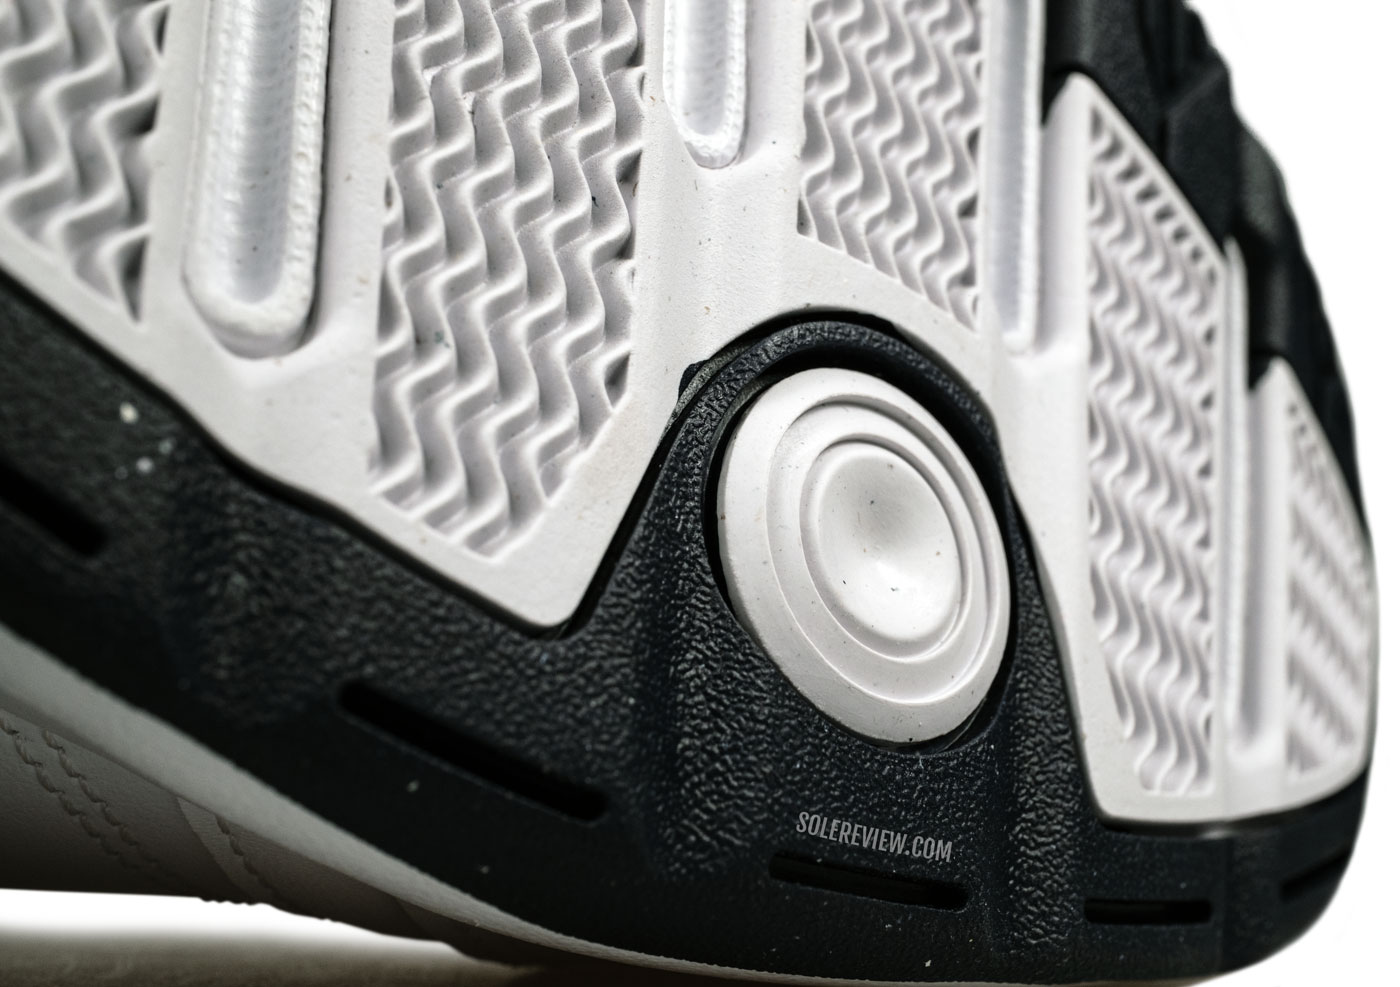 The pivot point of the Nike Monarch IV.